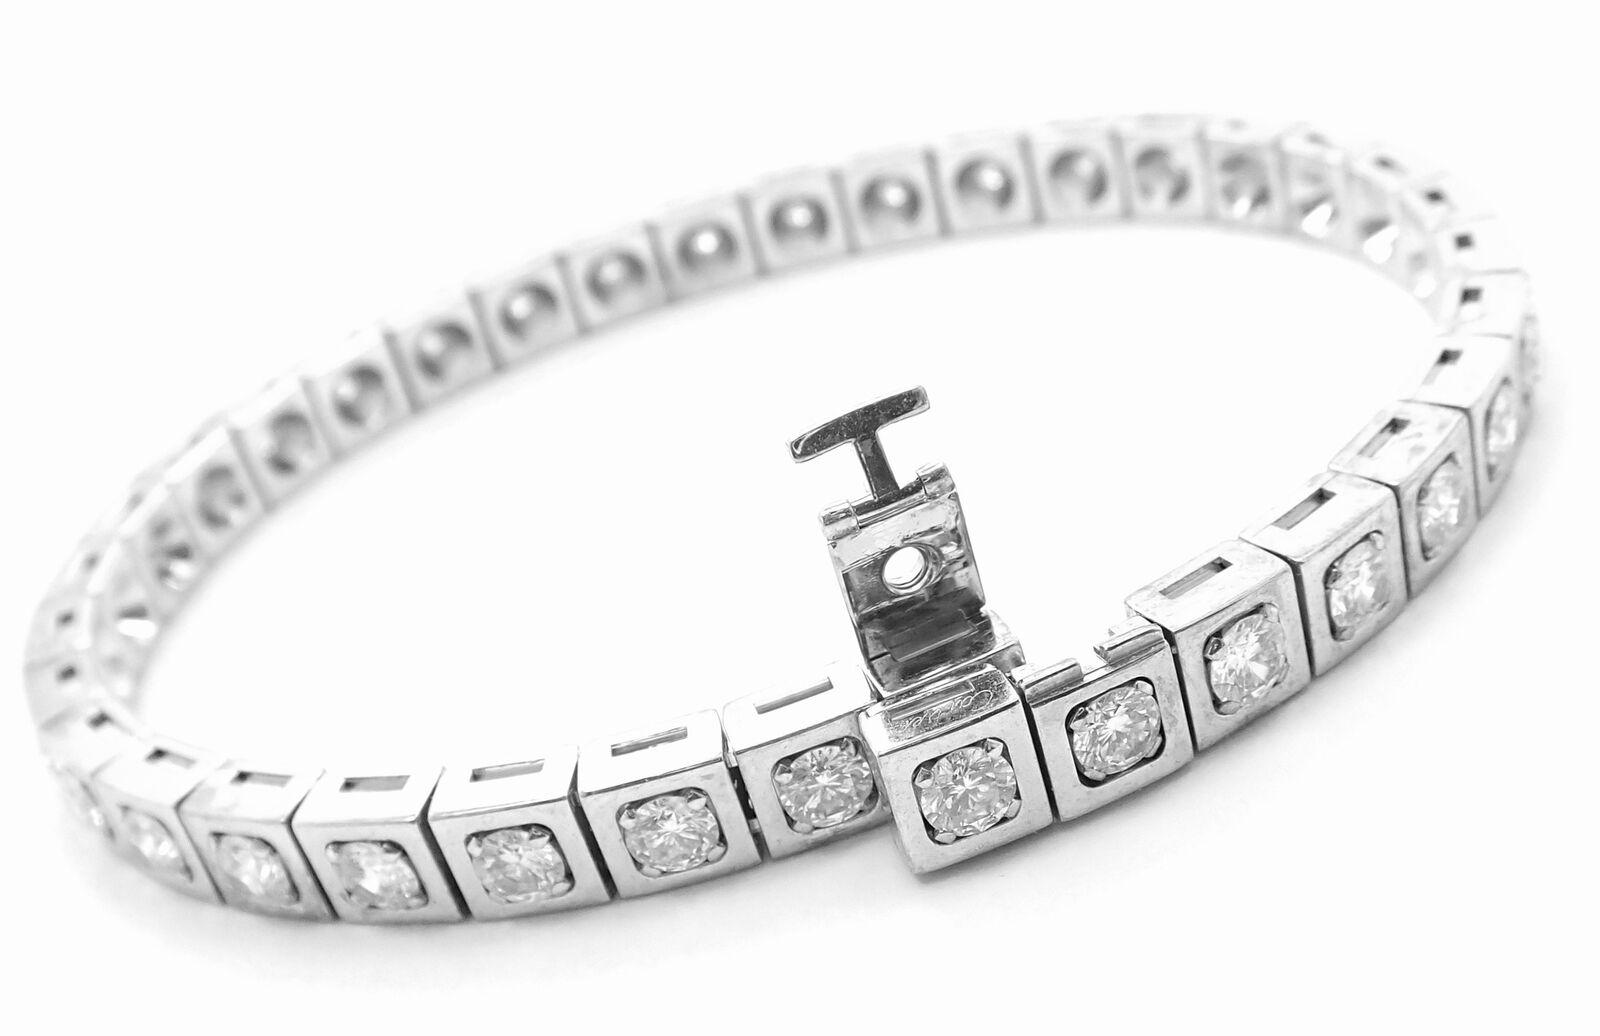 Cartier Tectonique Diamond Tennis White Gold Bangle Bracelet In Excellent Condition For Sale In Holland, PA